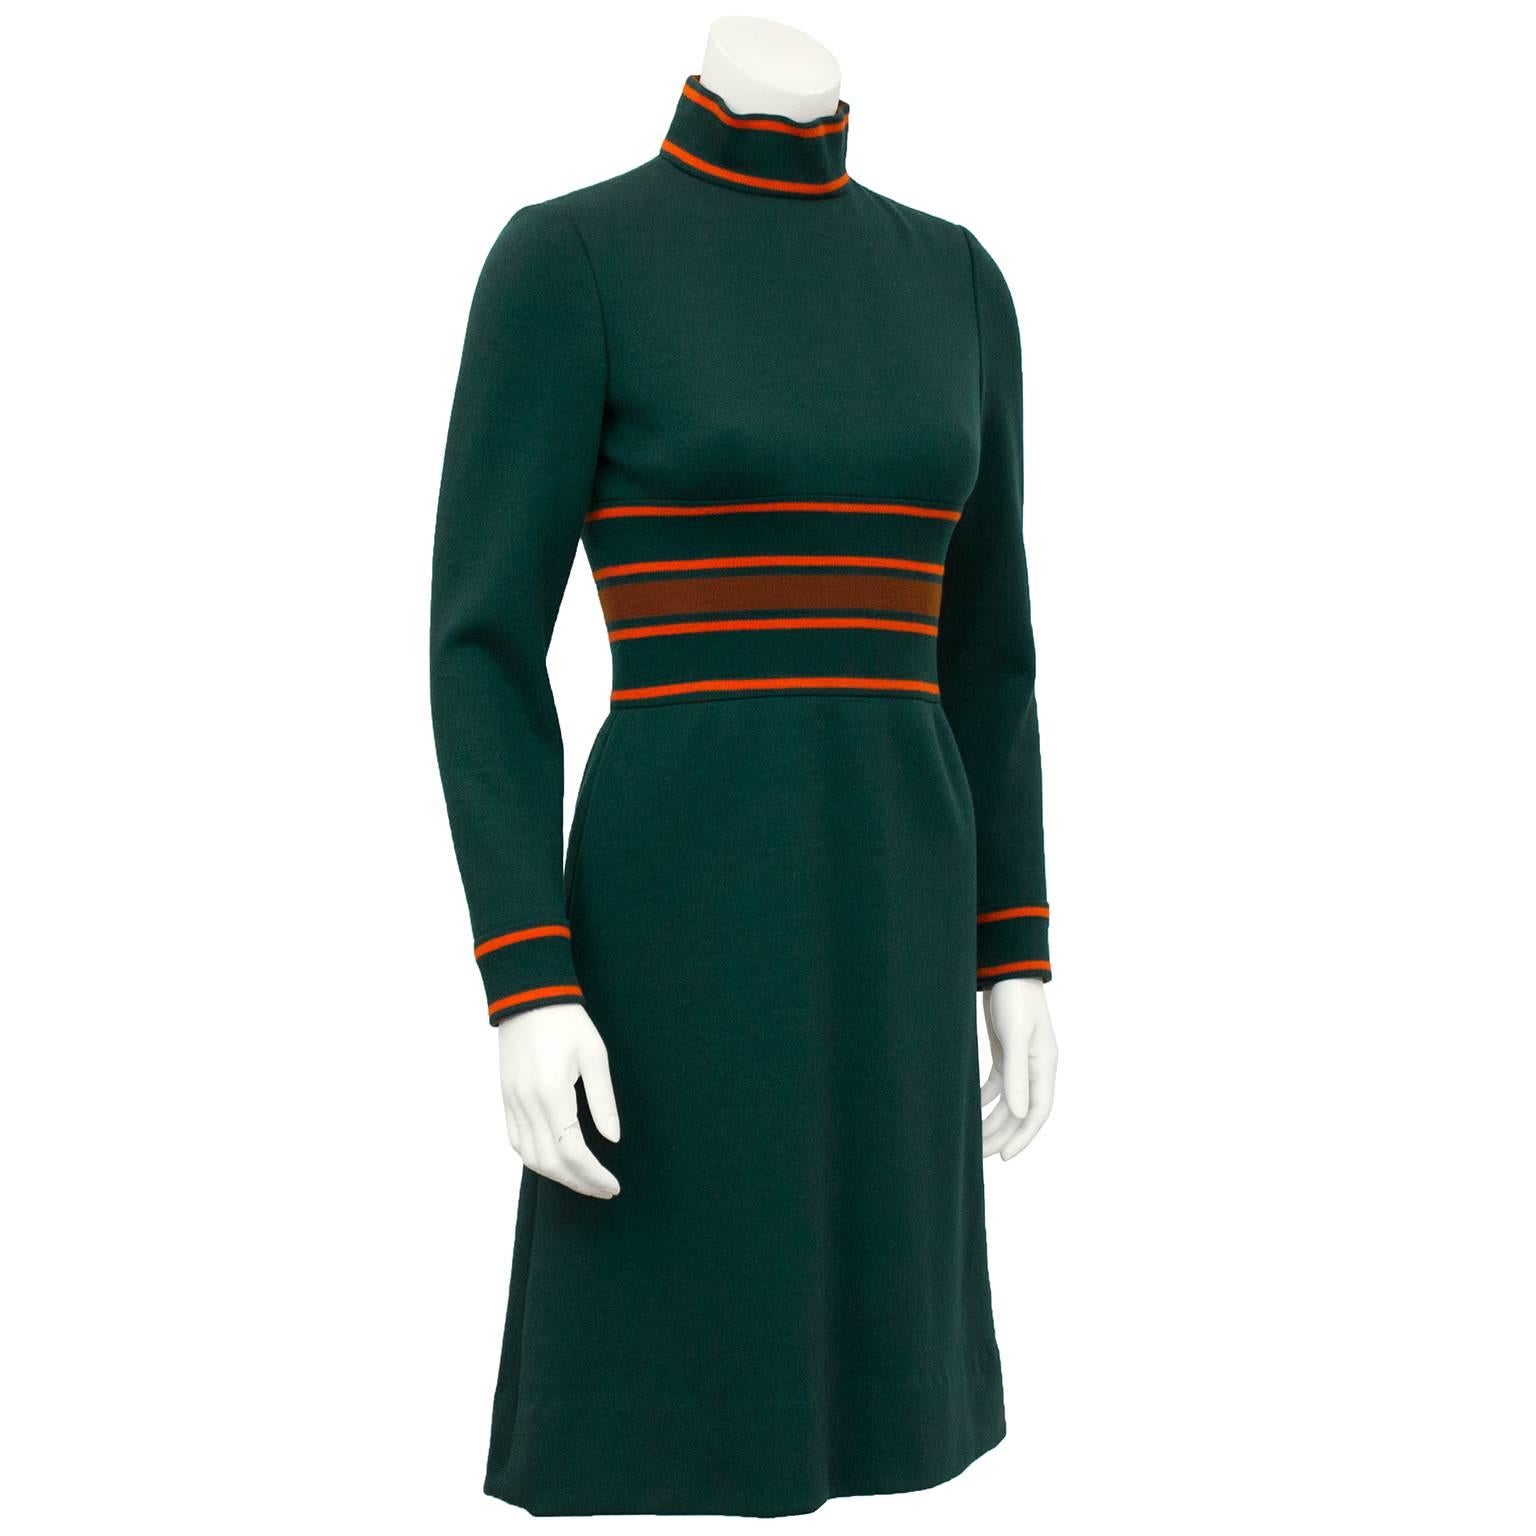 1960's forest green Pierre Cardin knit turtleneck dress. Orange stripe ribbed detailing at neck, waist and cuffs. Slight a-line flare to skirt. Excellent transition piece for fall to winter. Excellent vintage condition, fits like a US 4. 

Sleeve